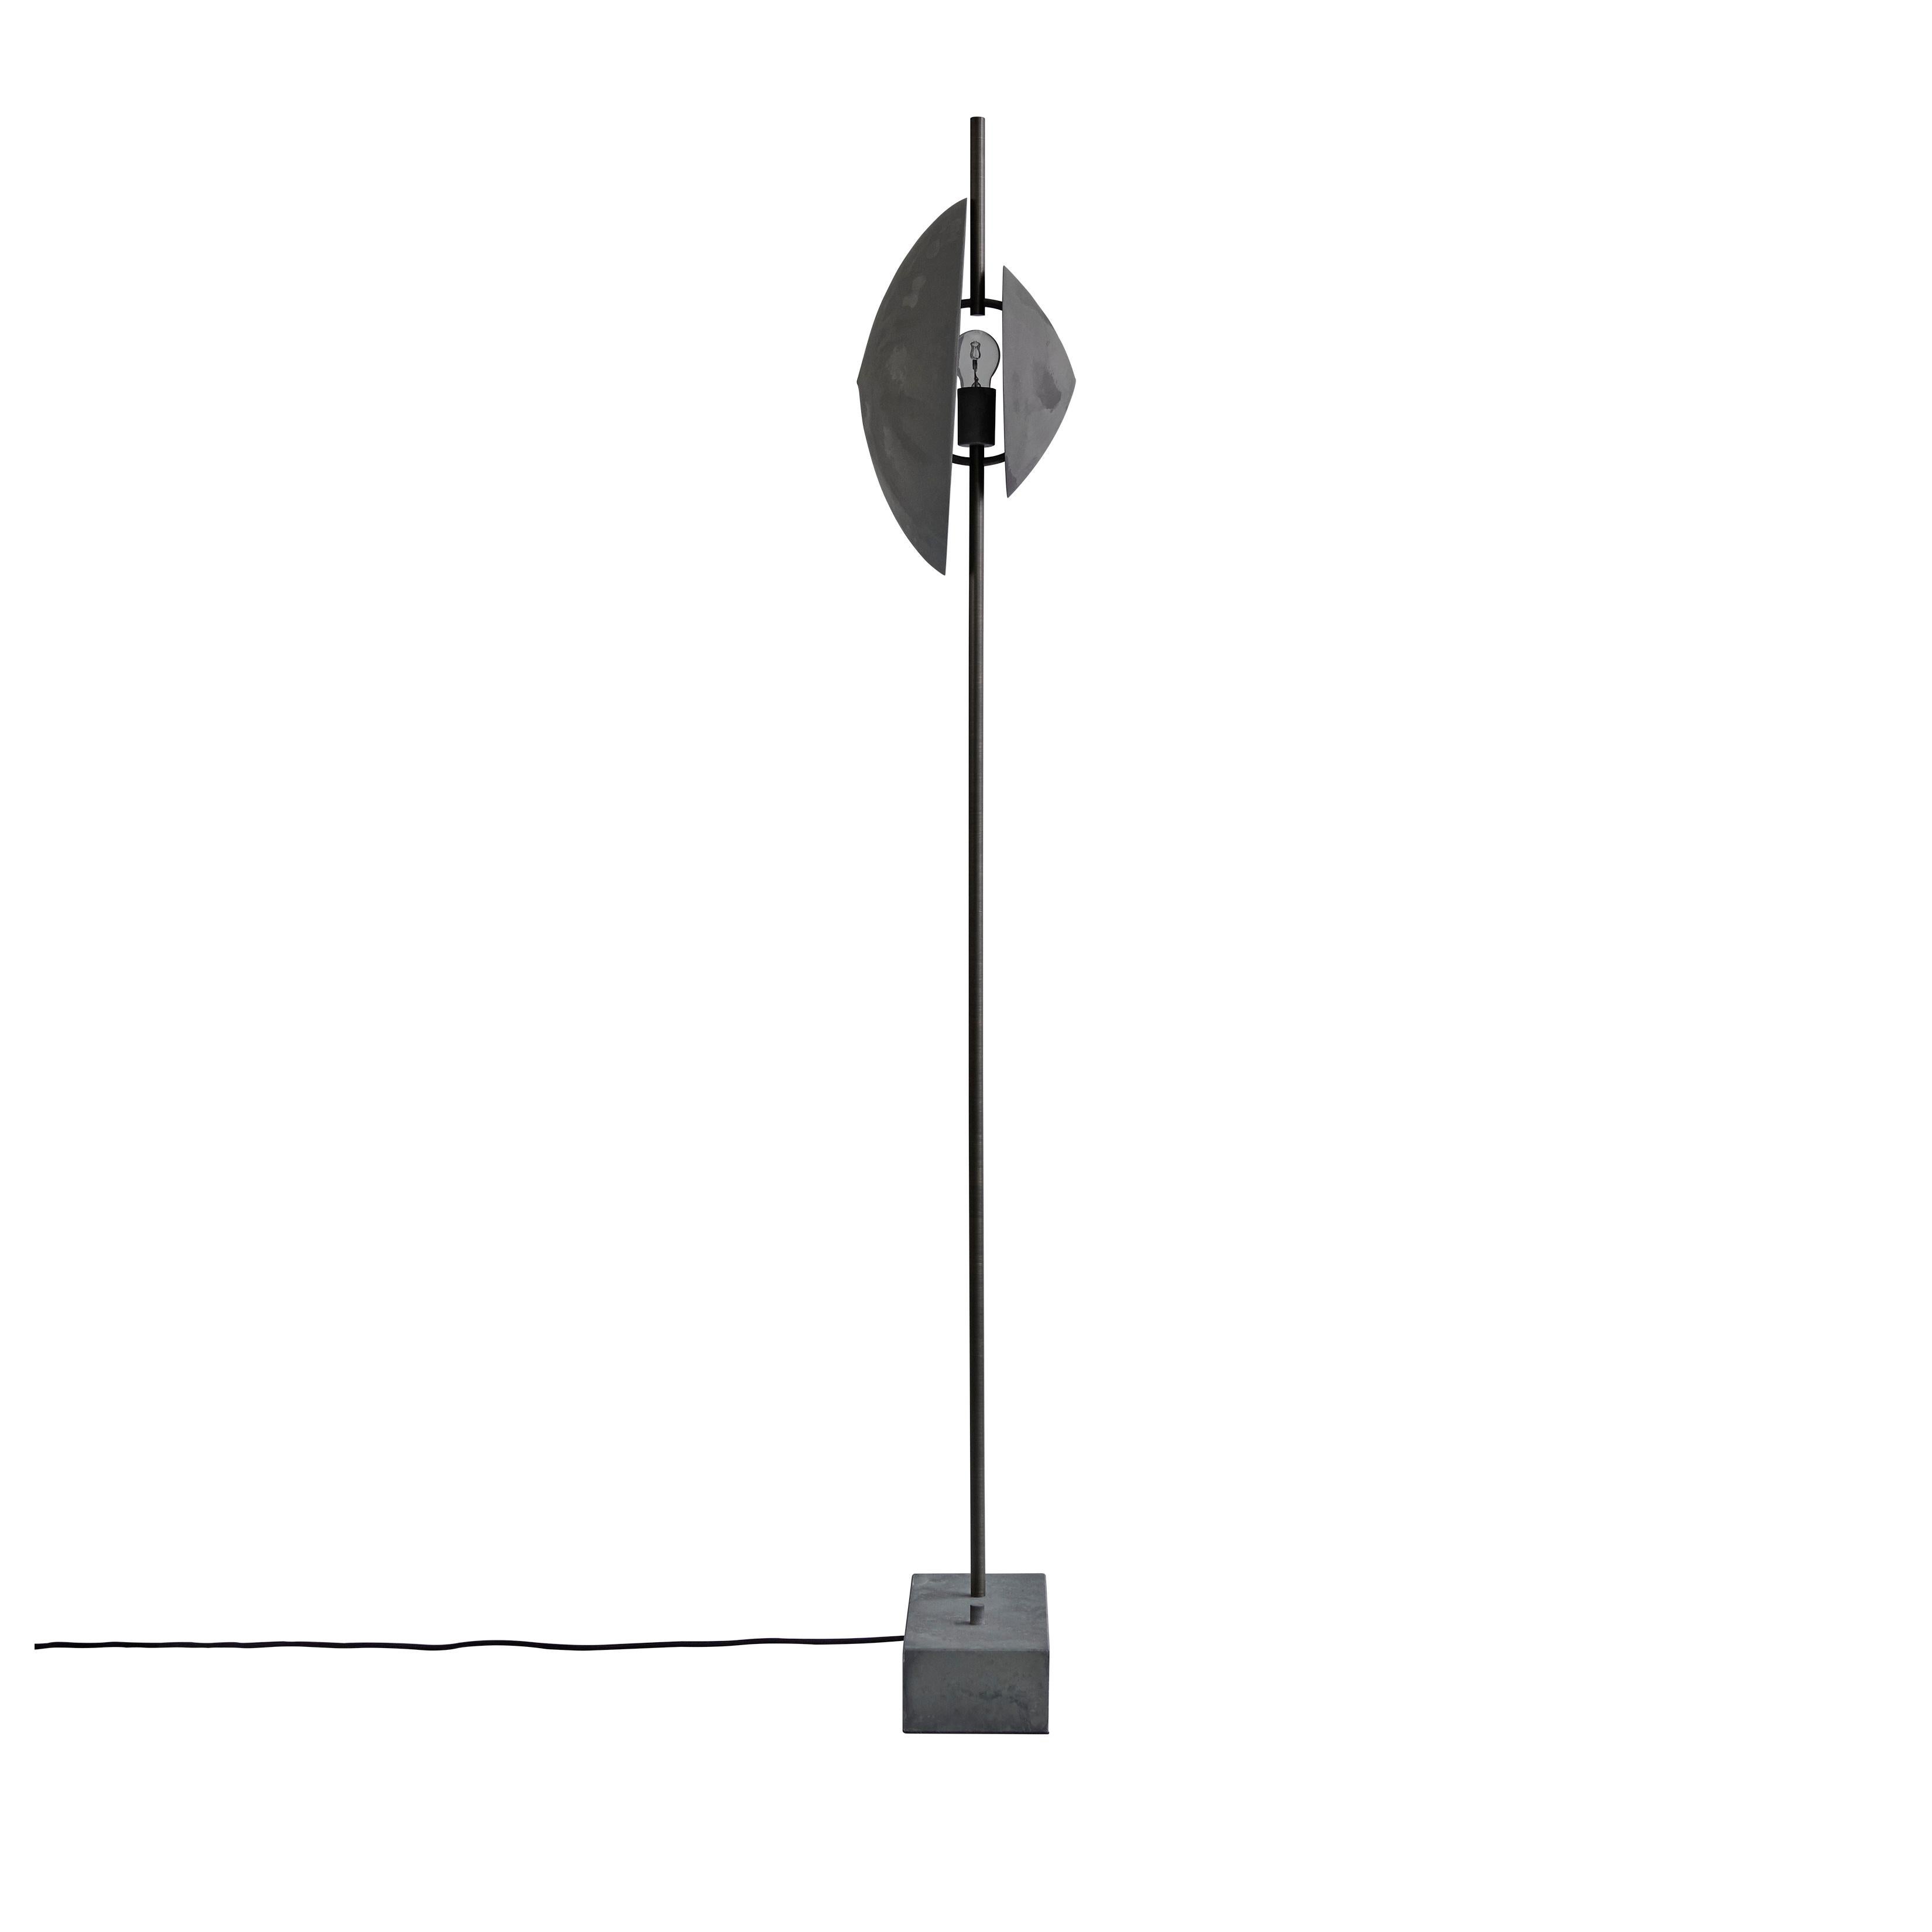 Dawn floor lamp by 101 Copenhagen
Designed by Kristian Sofus Hansen & Tommy Hyldahl.
Dimensions: L 30 x W 40 x H 168 cm
Cable length: 200 CM

Materials: Metal: Aluminum / Oxidezed
Cable: Fabric covered cable / Black

With its layered shades,